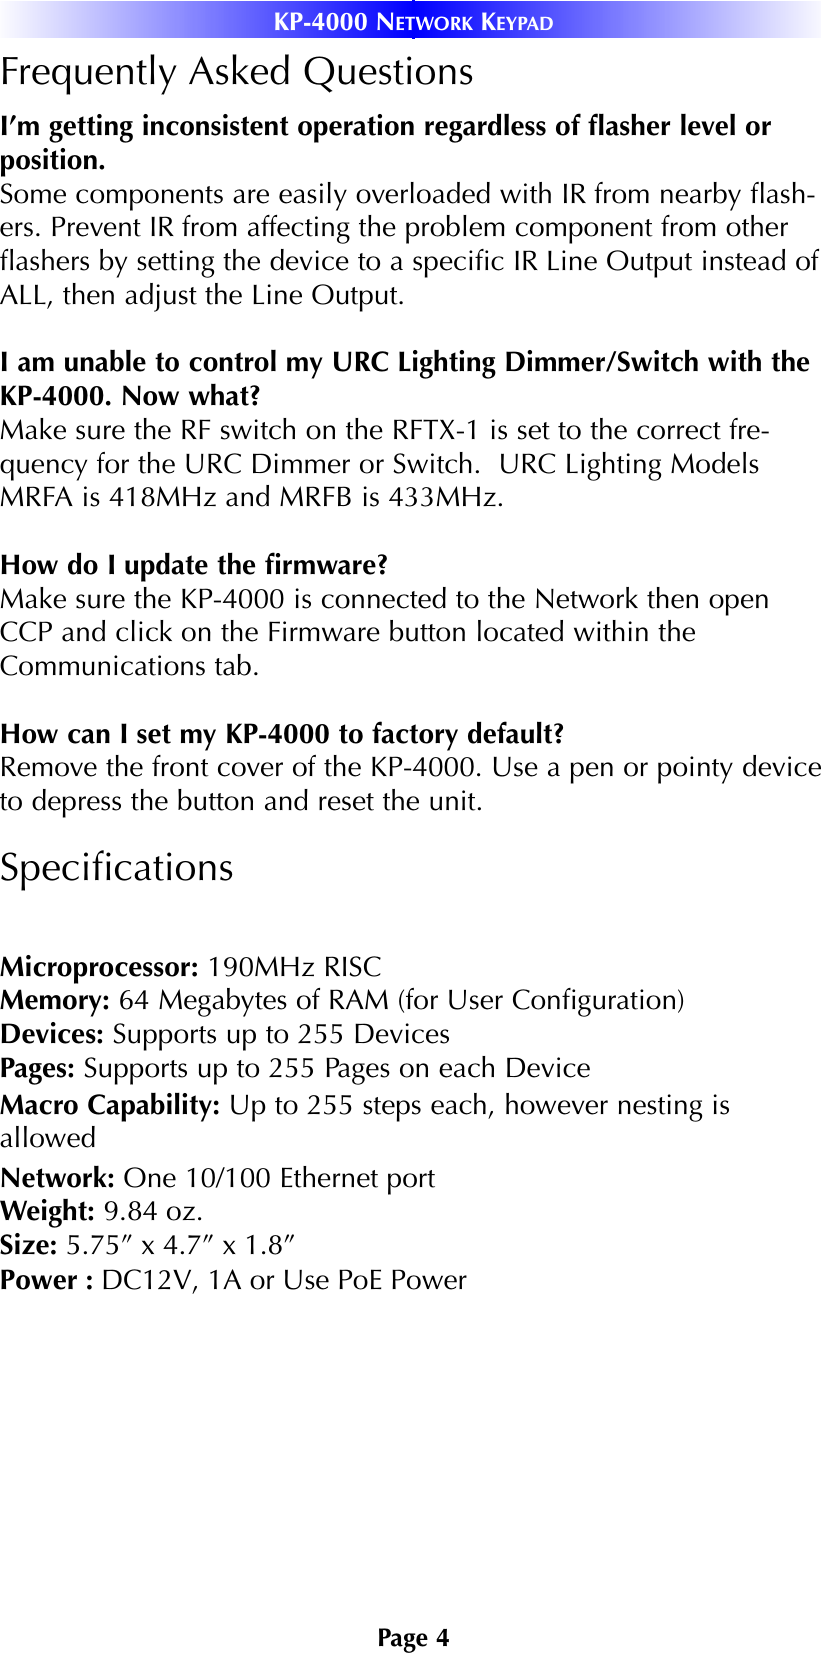 Page 4KP-4000 NETWORK KEYPADFrequently Asked QuestionsI’m getting inconsistent operation regardless of ﬂasher level orposition.Some components are easily overloaded with IR from nearby ﬂash-ers. Prevent IR from affecting the problem component from otherﬂashers by setting the device to a speciﬁc IR Line Output instead ofALL, then adjust the Line Output.I am unable to control my URC Lighting Dimmer/Switch with theKP-4000. Now what?Make sure the RF switch on the RFTX-1 is set to the correct fre-quency for the URC Dimmer or Switch.  URC Lighting ModelsMRFA is 418MHz and MRFB is 433MHz.How do I update the ﬁrmware?Make sure the KP-4000 is connected to the Network then openCCP and click on the Firmware button located within theCommunications tab. How can I set my KP-4000 to factory default?Remove the front cover of the KP-4000. Use a pen or pointy deviceto depress the button and reset the unit. SpeciﬁcationsMicroprocessor: 190MHz RISCMemory: 64 Megabytes of RAM (for User Conﬁguration)Devices: Supports up to 255 DevicesPages: Supports up to 255 Pages on each DeviceMacro Capability: Up to 255 steps each, however nesting isallowedNetwork: One 10/100 Ethernet portWeight: 9.84 oz.Size: 5.75” x 4.7” x 1.8”Power : DC12V, 1A or Use PoE Power